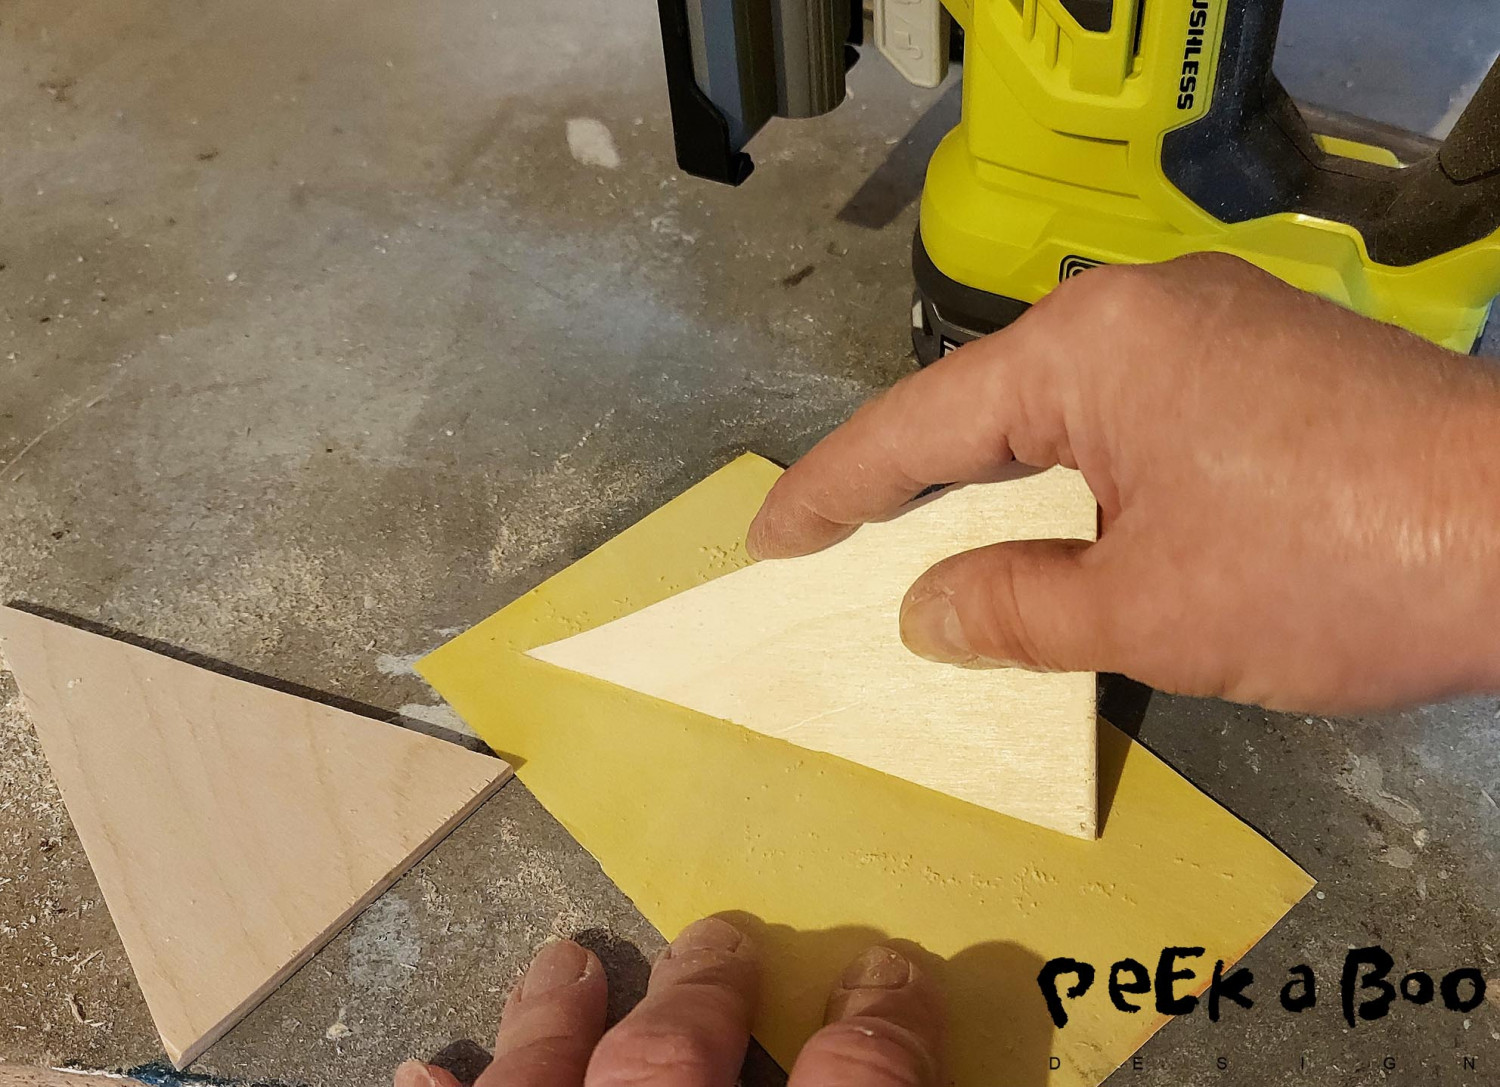 make the edges smooth with sandpaper.